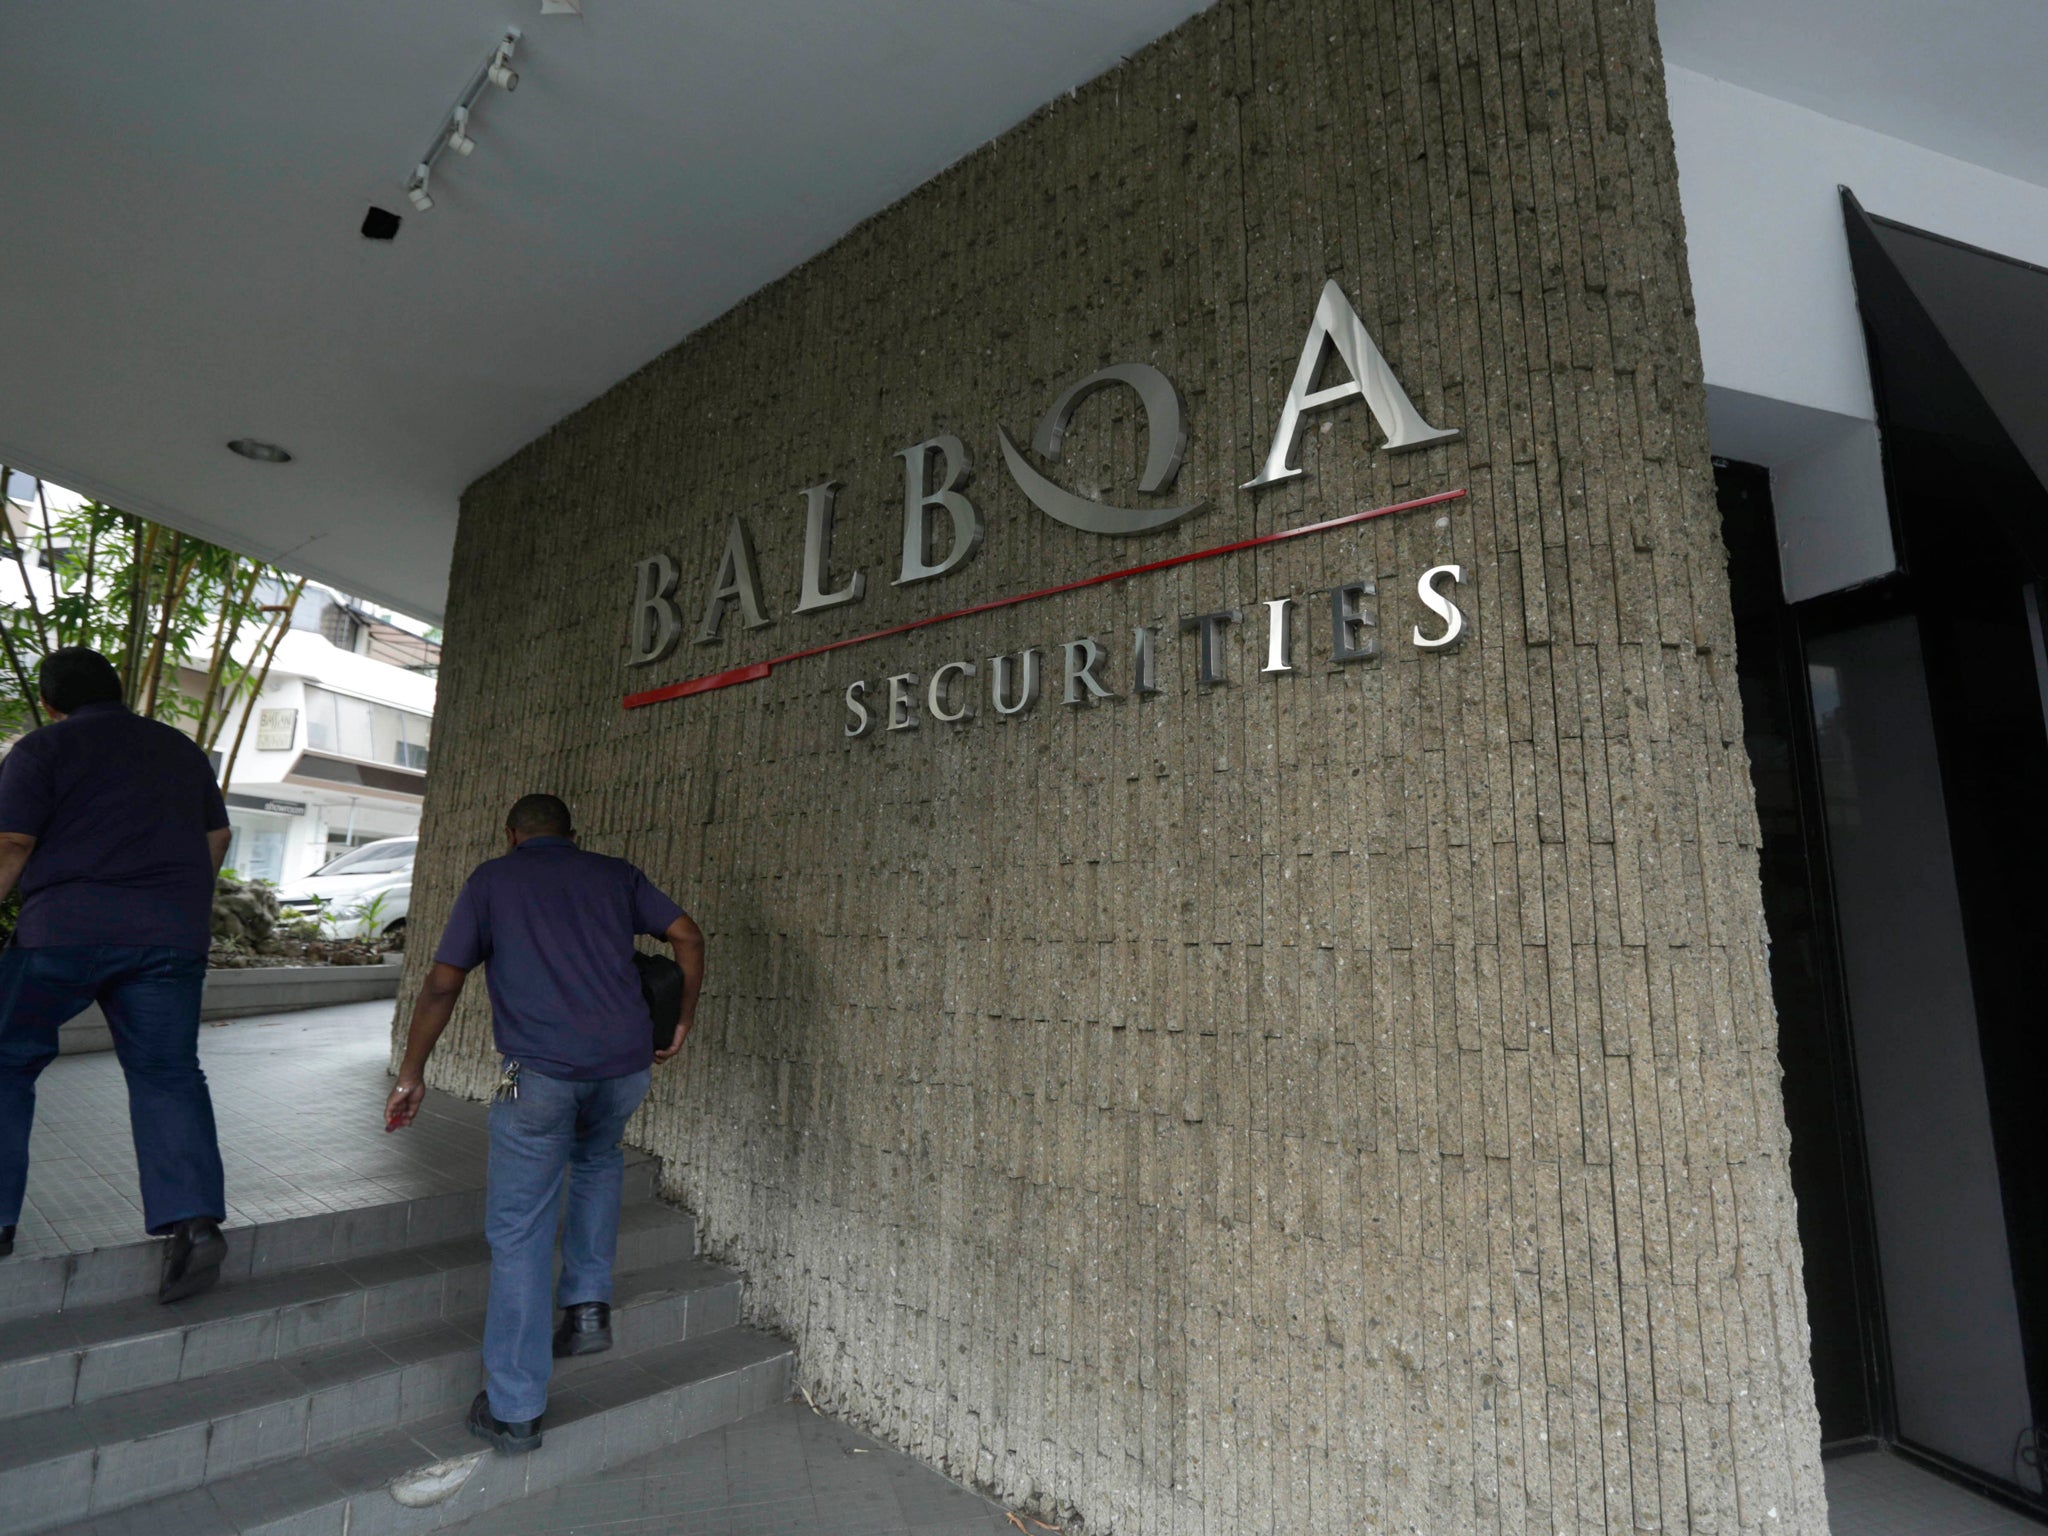 Police are reportedly posted outside of Balboa Bank & Trust's Panama headquarters